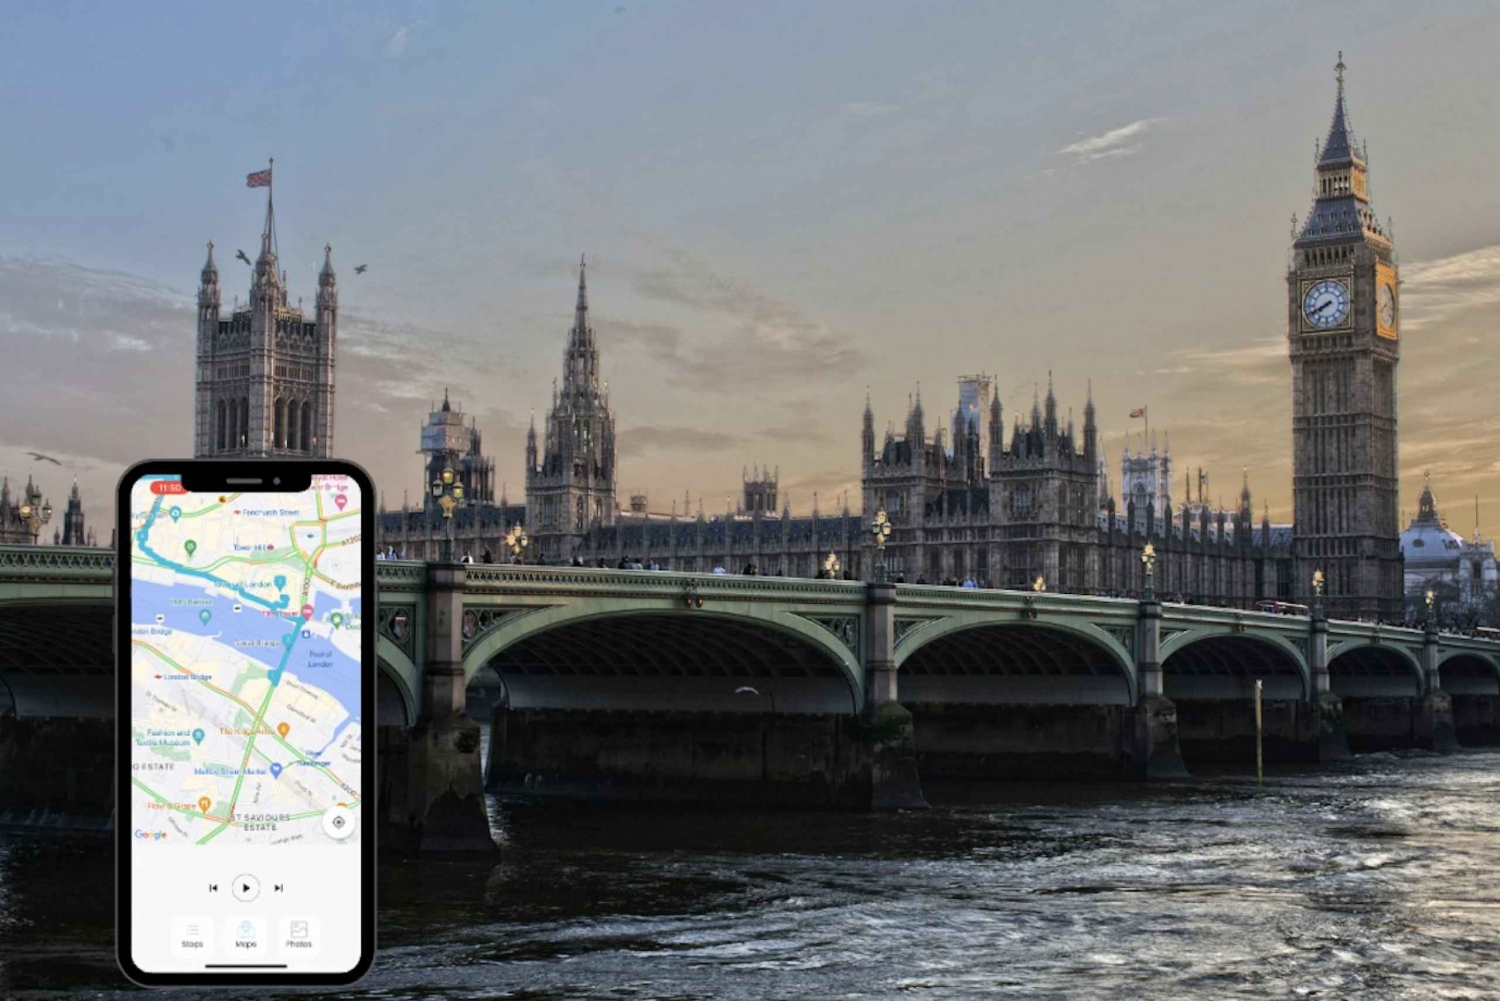 London: Highlights self-guided walking tour with mobile app